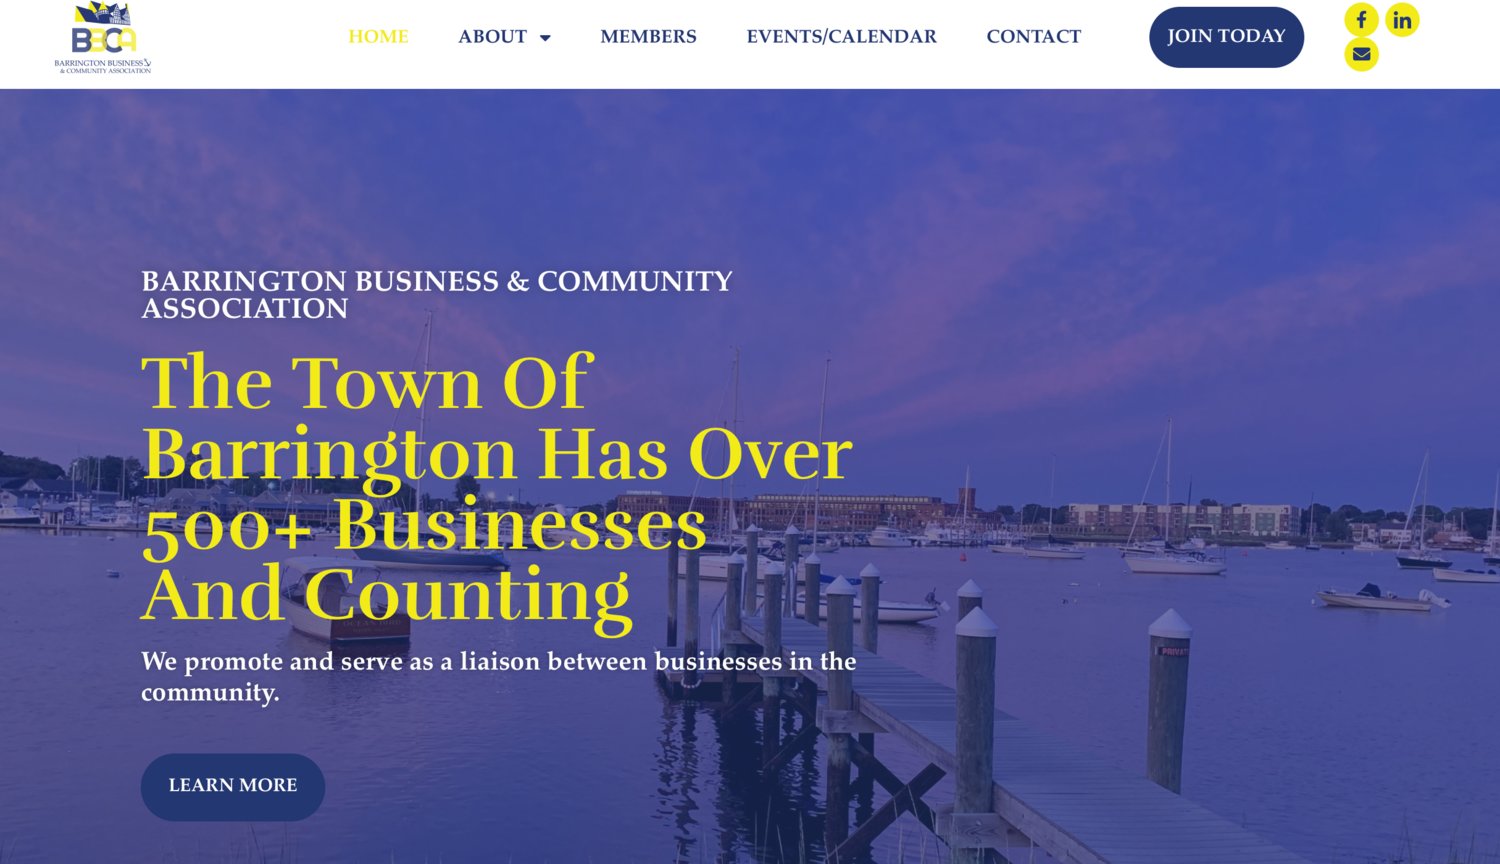 The Barrington Business and Community Association has developed a new website and is planning some exciting events for this summer.